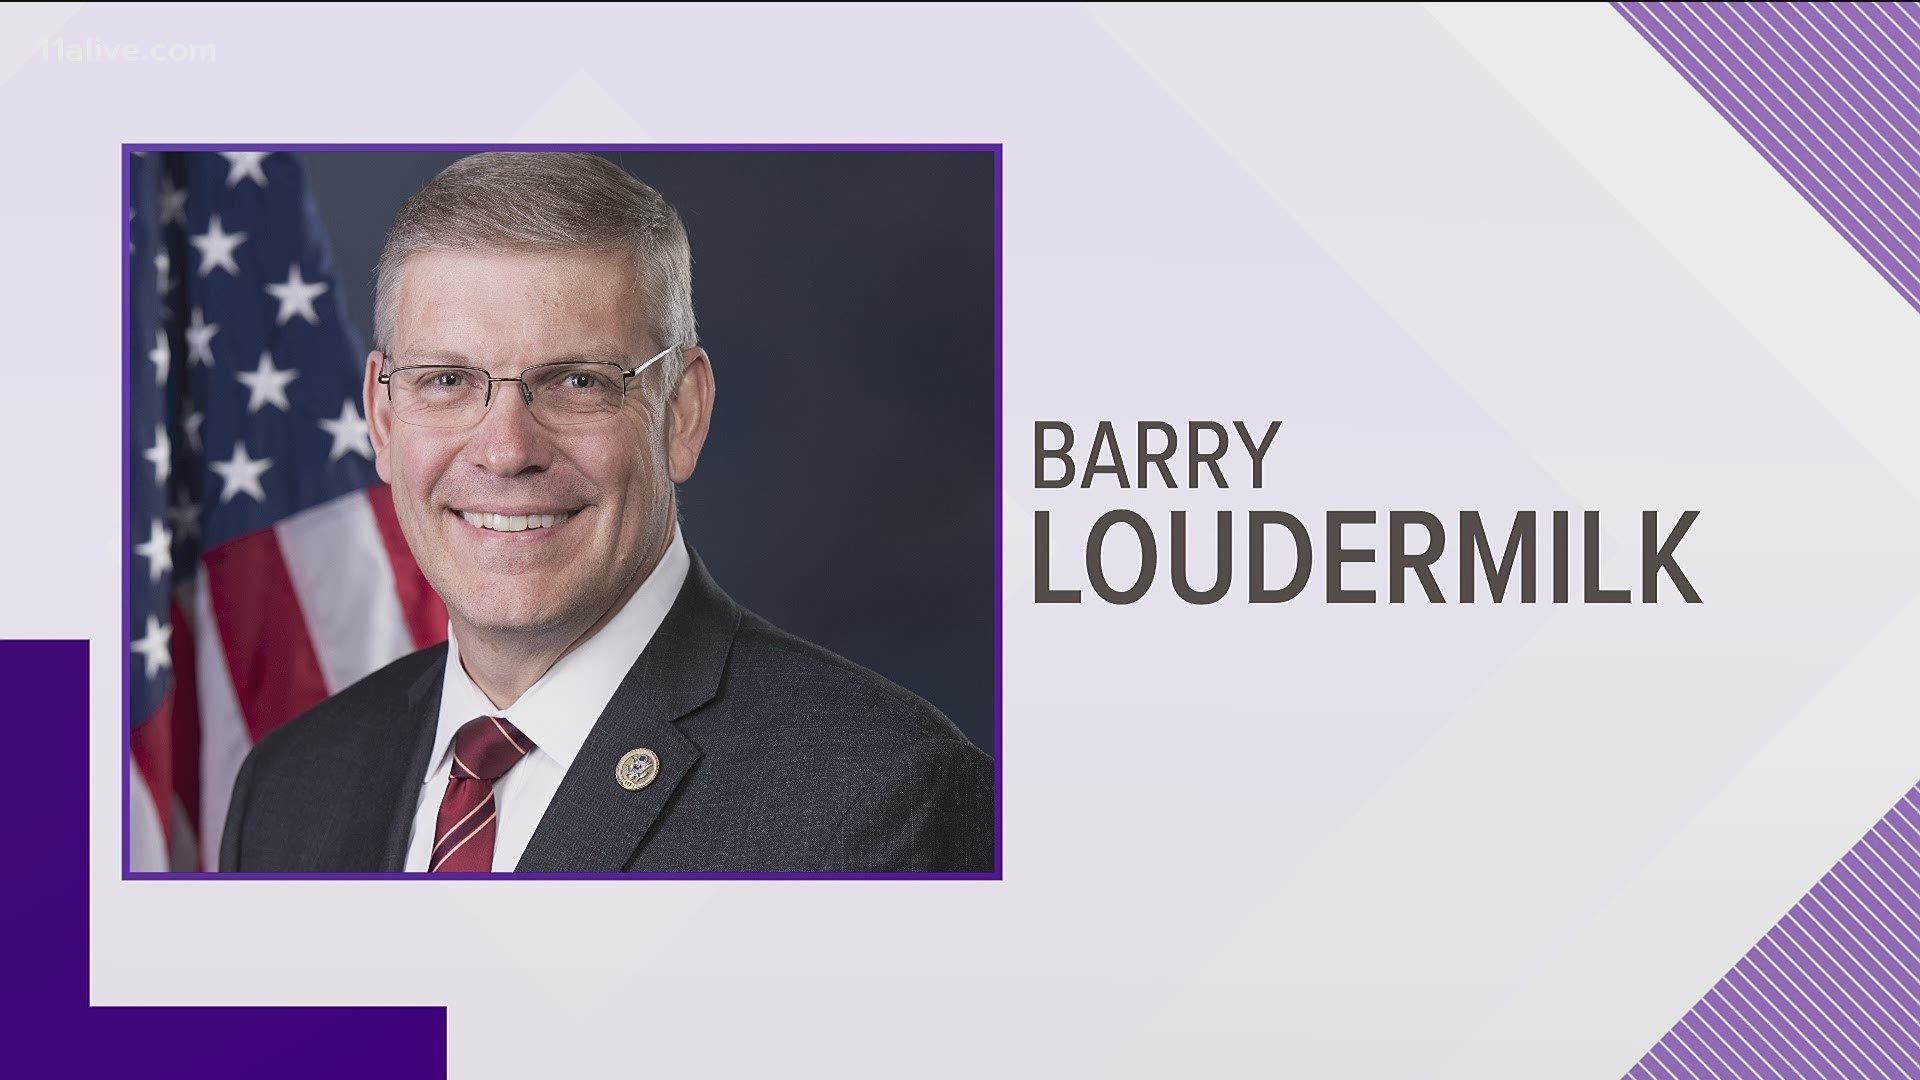 U.S. Rep. Barry Loudermilk has tested positive for COVID-19. That makes him the fourth Republican representative from Georgia to contract the virus.